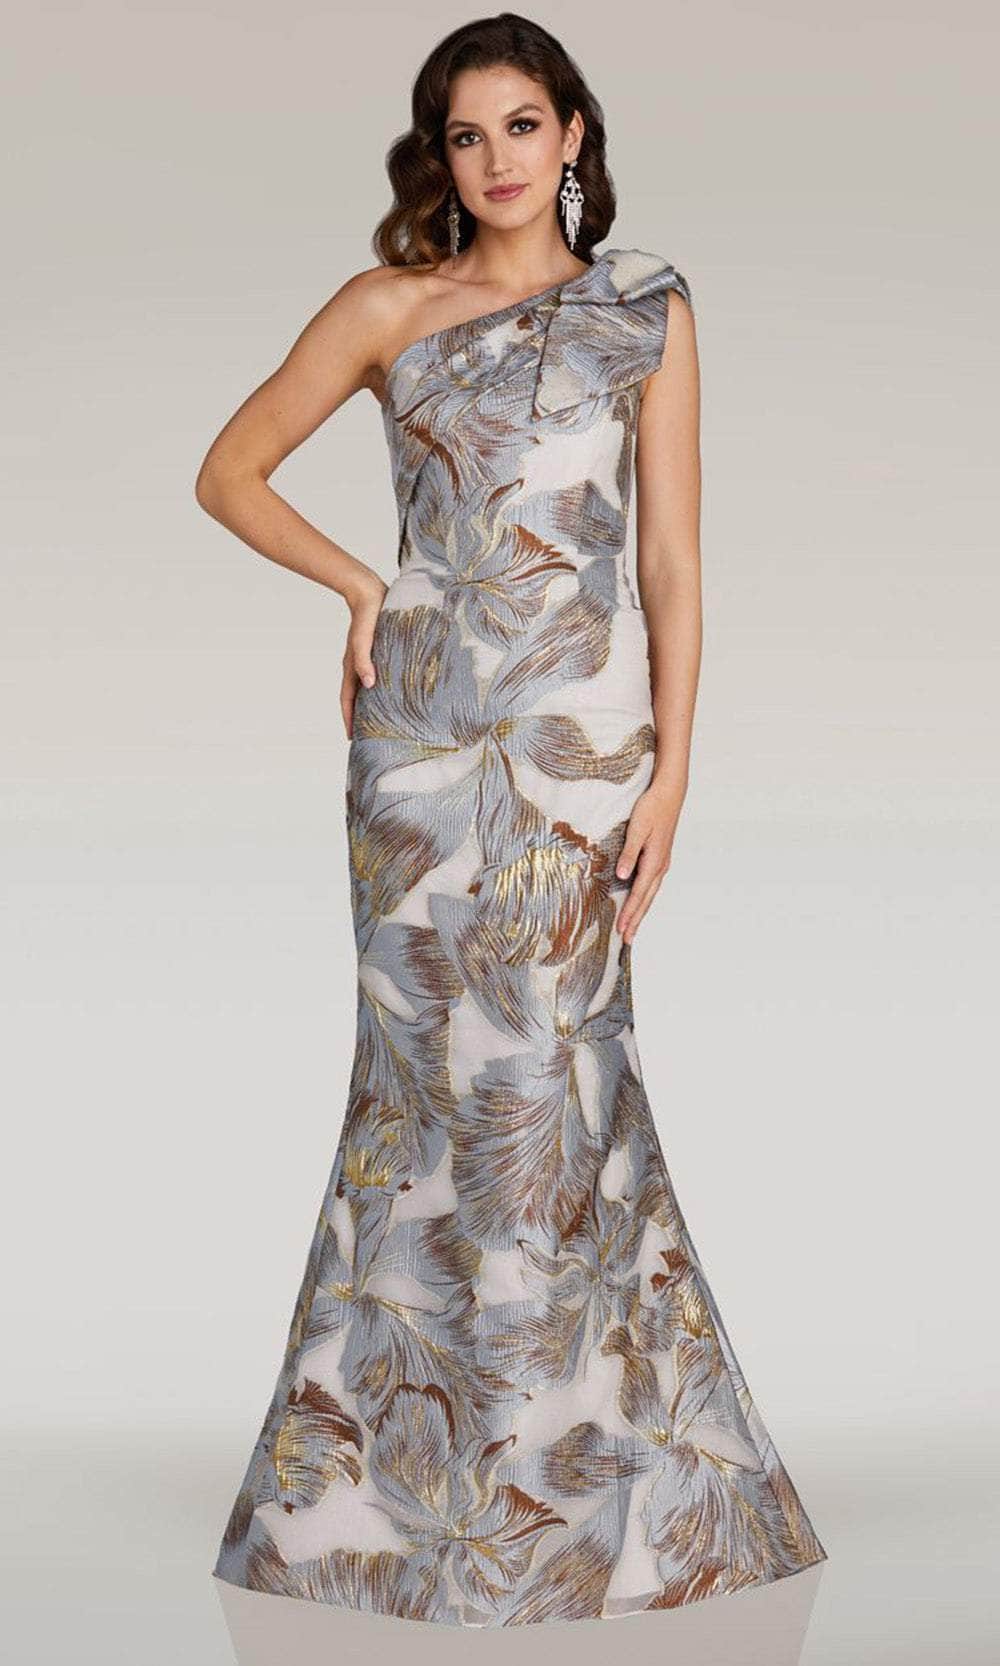 Image of Feriani Couture 18359 - Floral Print One Shoulder Evening Gown